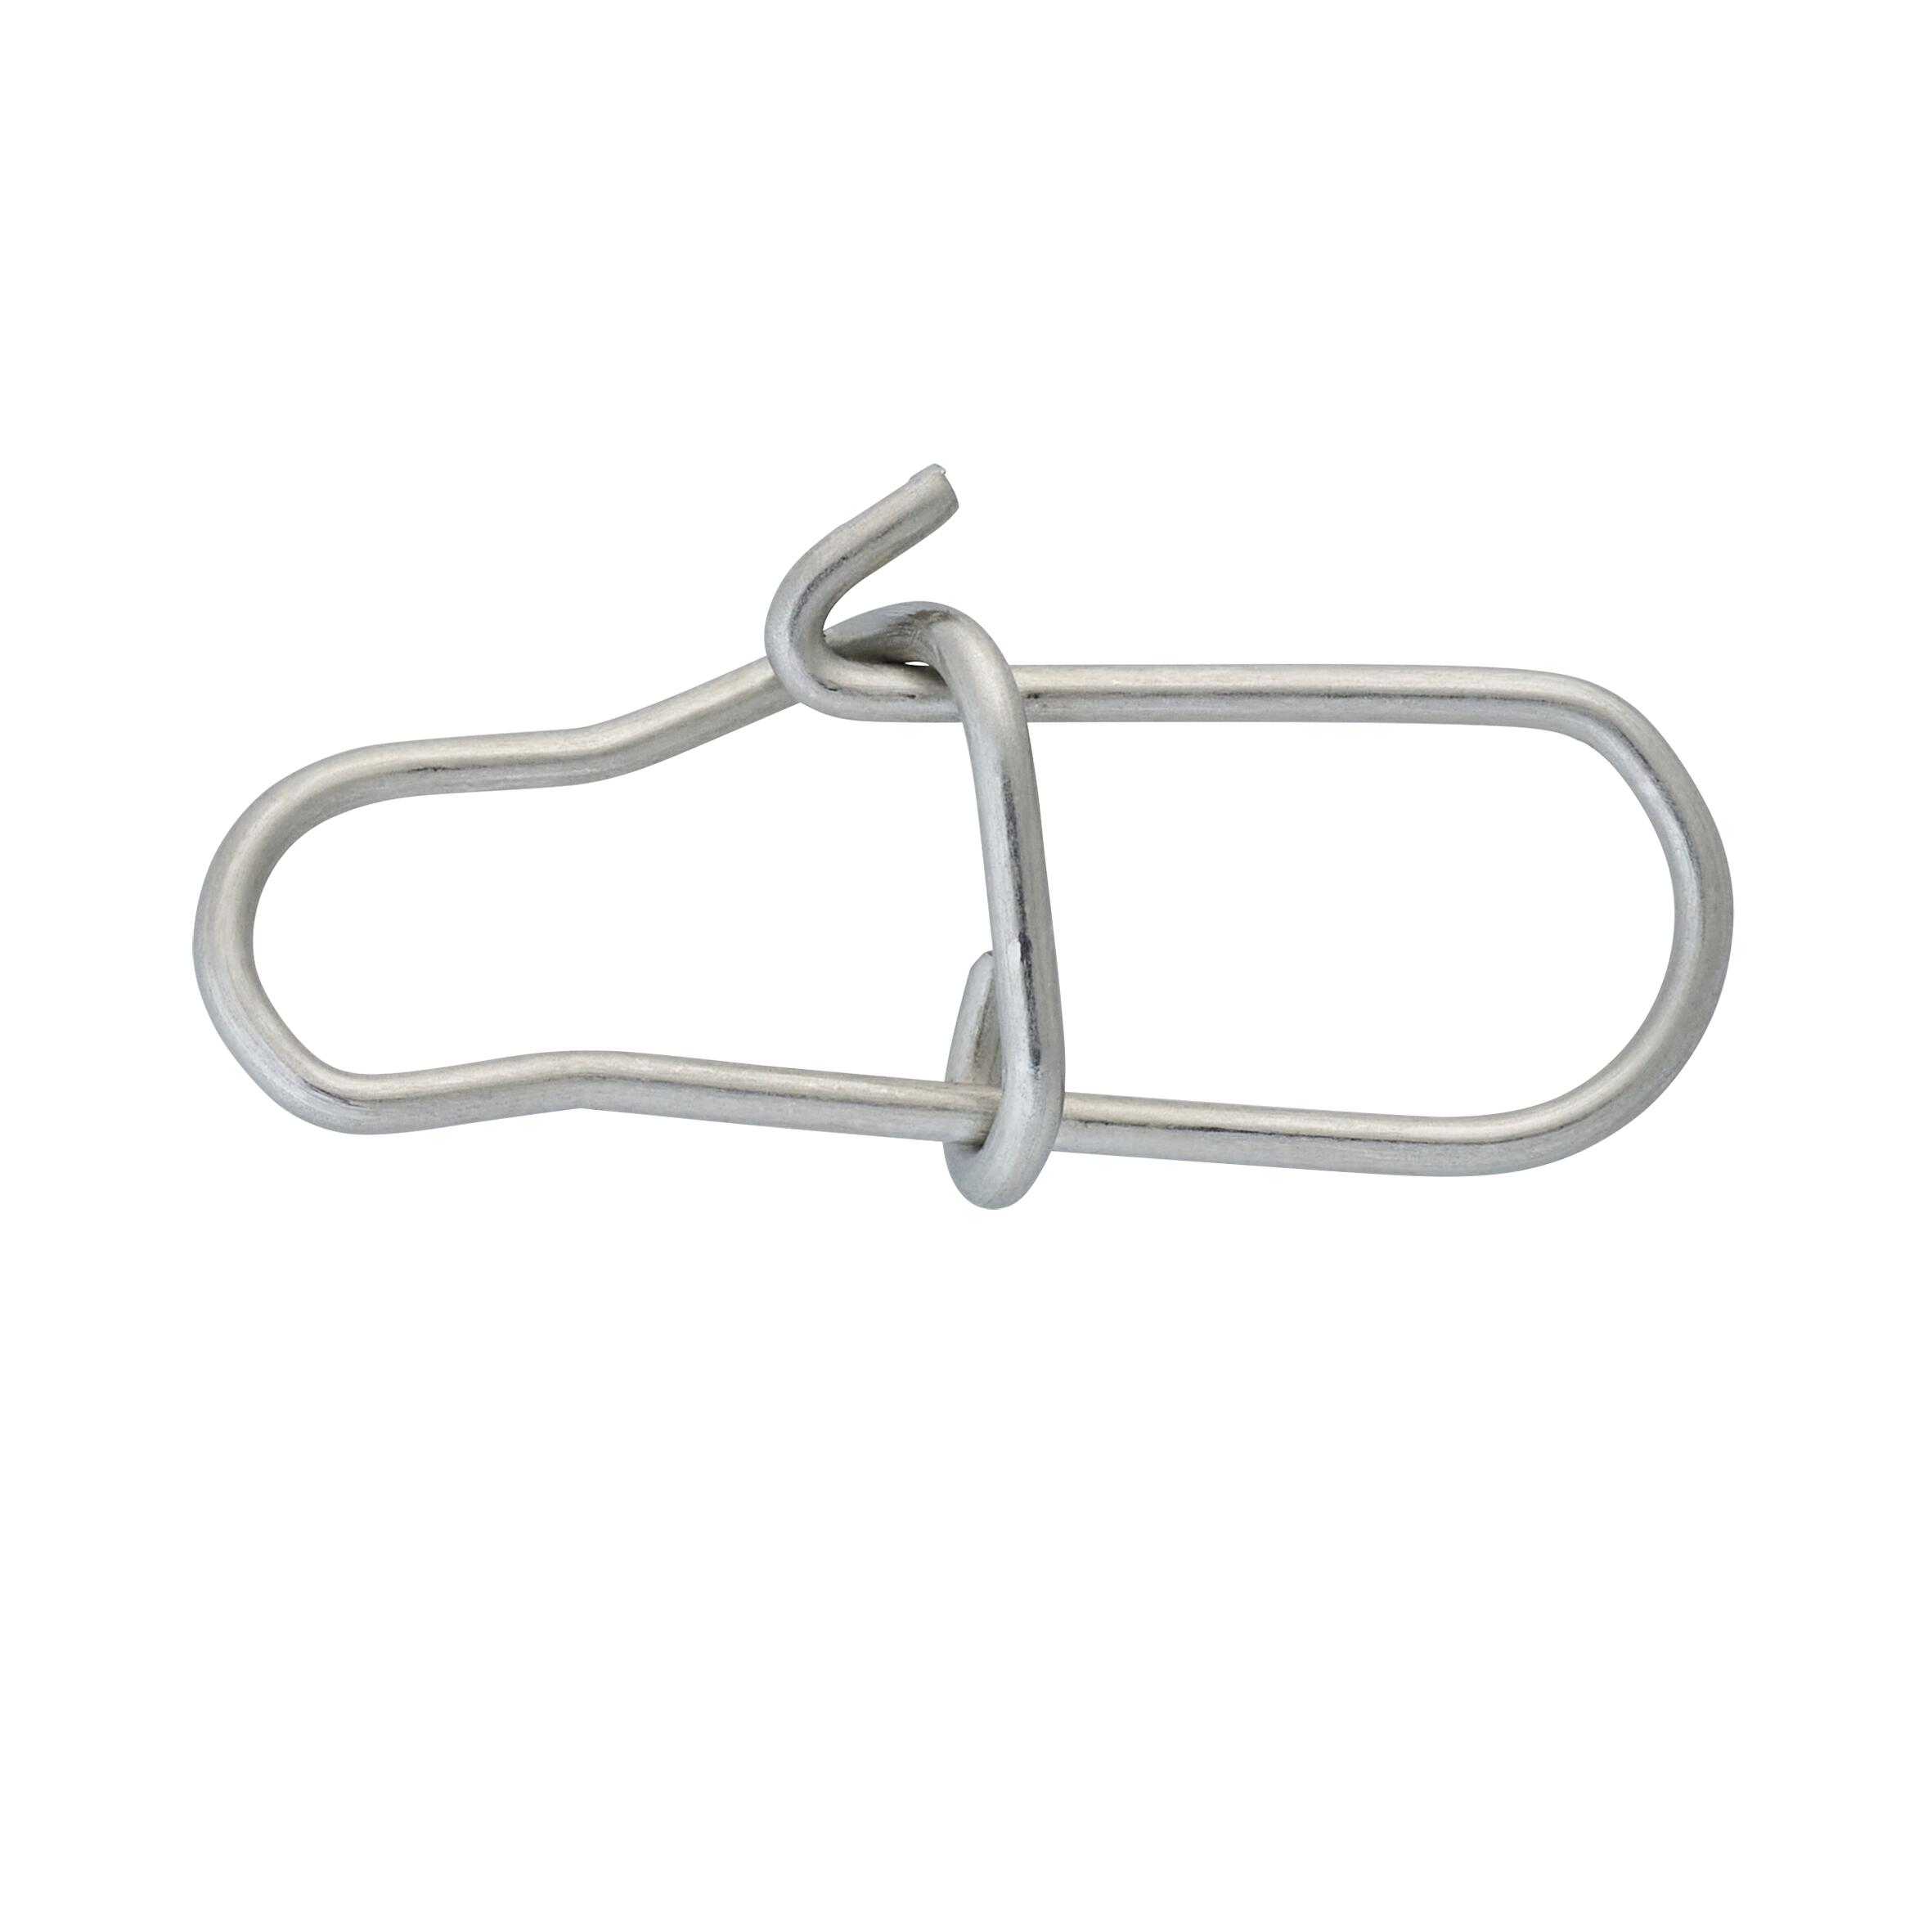 Fishing Stainless Steel Double Snap Clips x10 - CAPERLAN